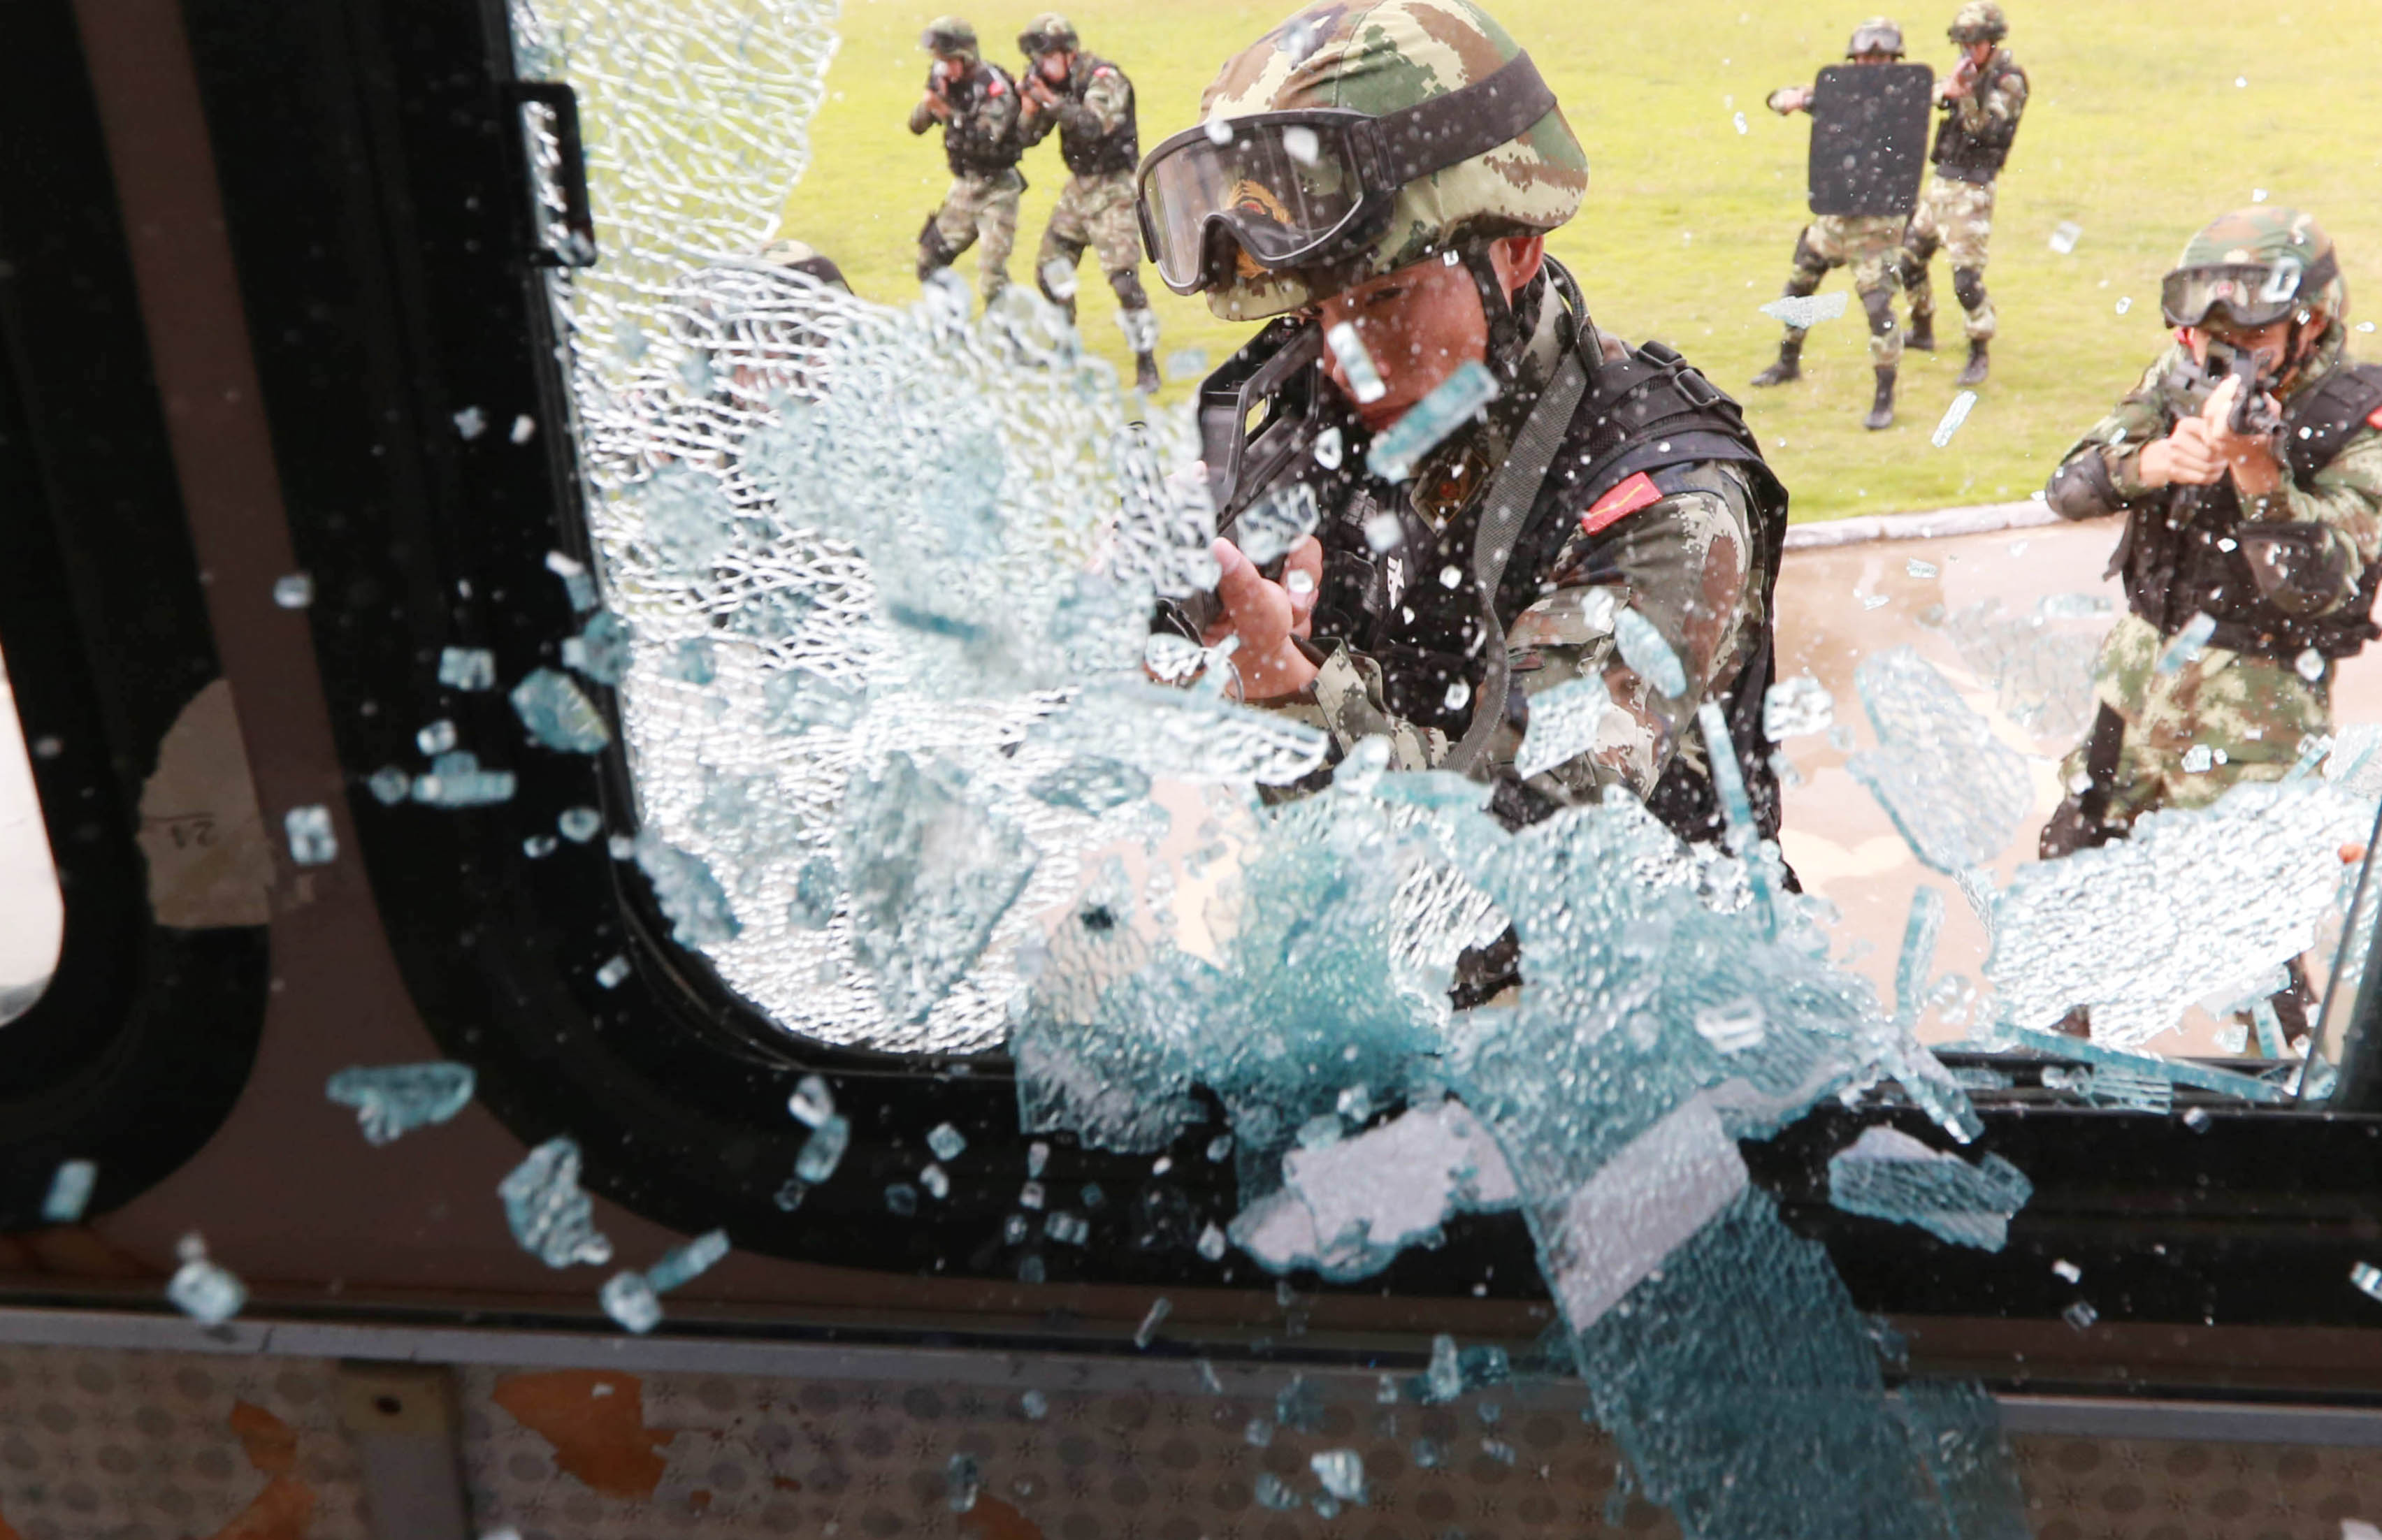 Police officers take part in an anti-terrorism drill in Guangxi. The law is not meant to address an academic issue, but aims to deal with a serious crime. Photo: Xinhua